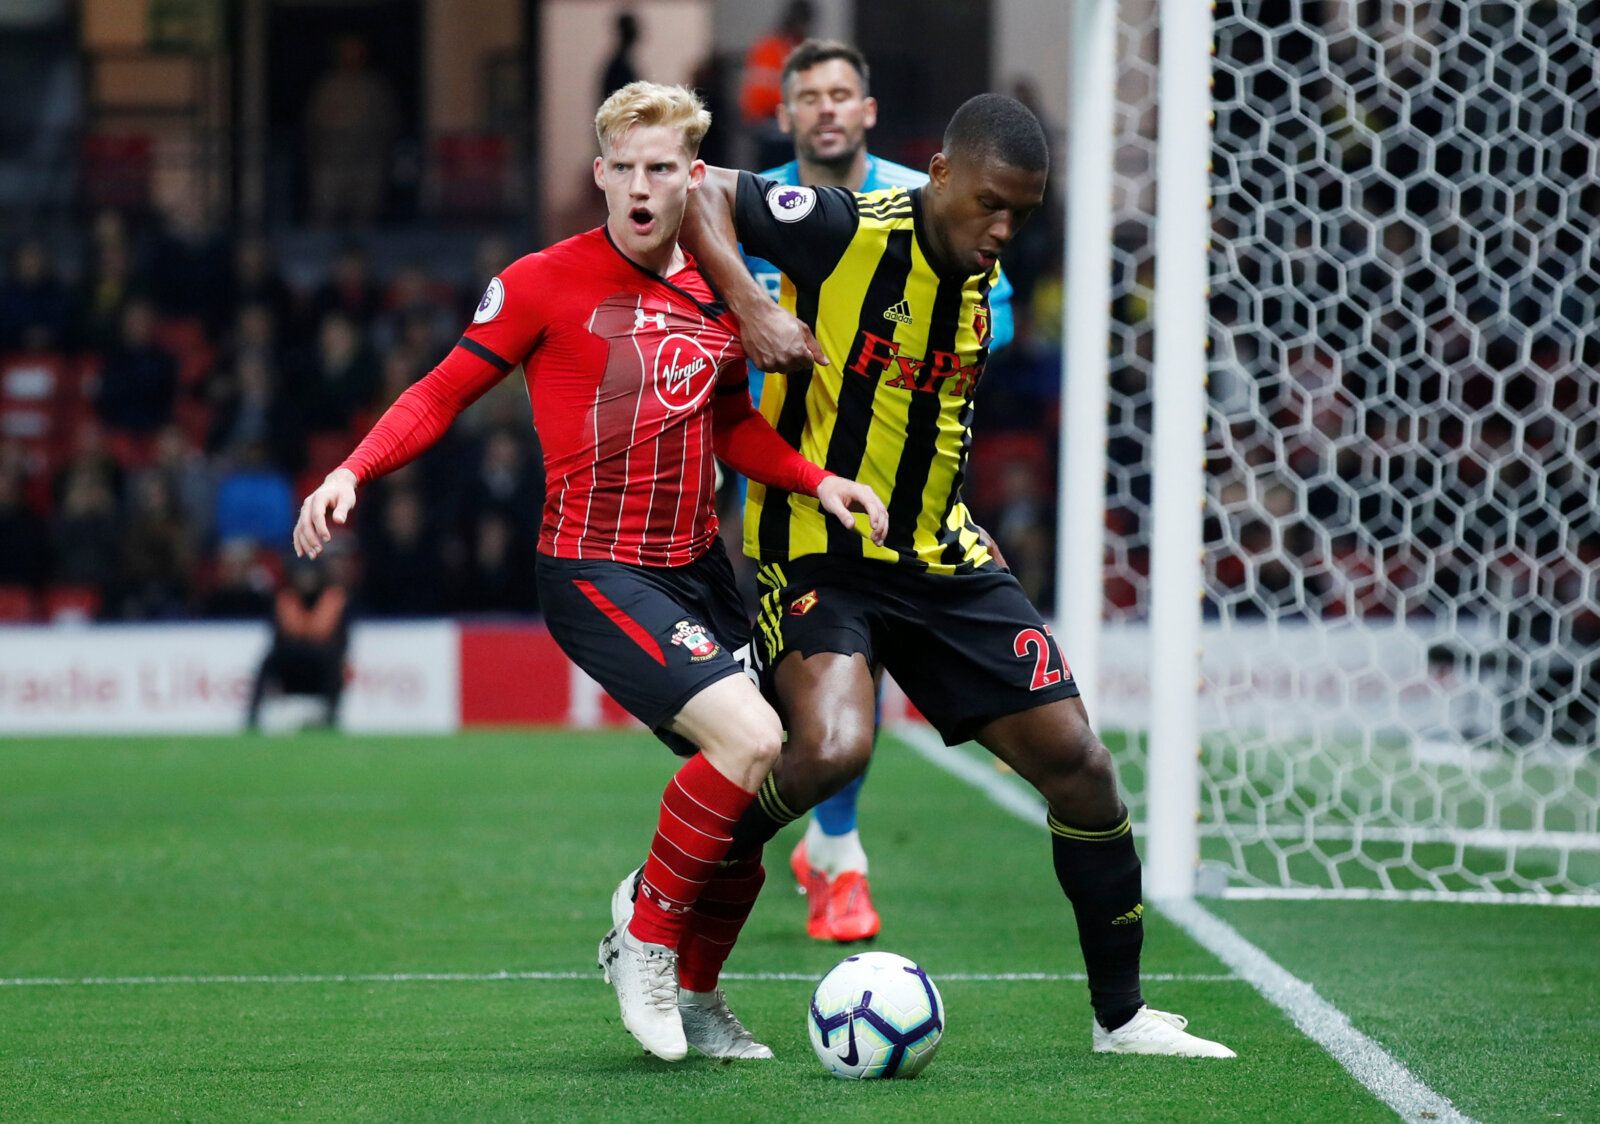 Soccer Football - Premier League - Watford v Southampton - Vicarage Road, Watford, Britain - April 23, 2019  Southampton's Josh Sims in action with Watford's Christian Kabasele              REUTERS/David Klein  EDITORIAL USE ONLY. No use with unauthorized audio, video, data, fixture lists, club/league logos or "live" services. Online in-match use limited to 75 images, no video emulation. No use in betting, games or single club/league/player publications.  Please contact your account representati